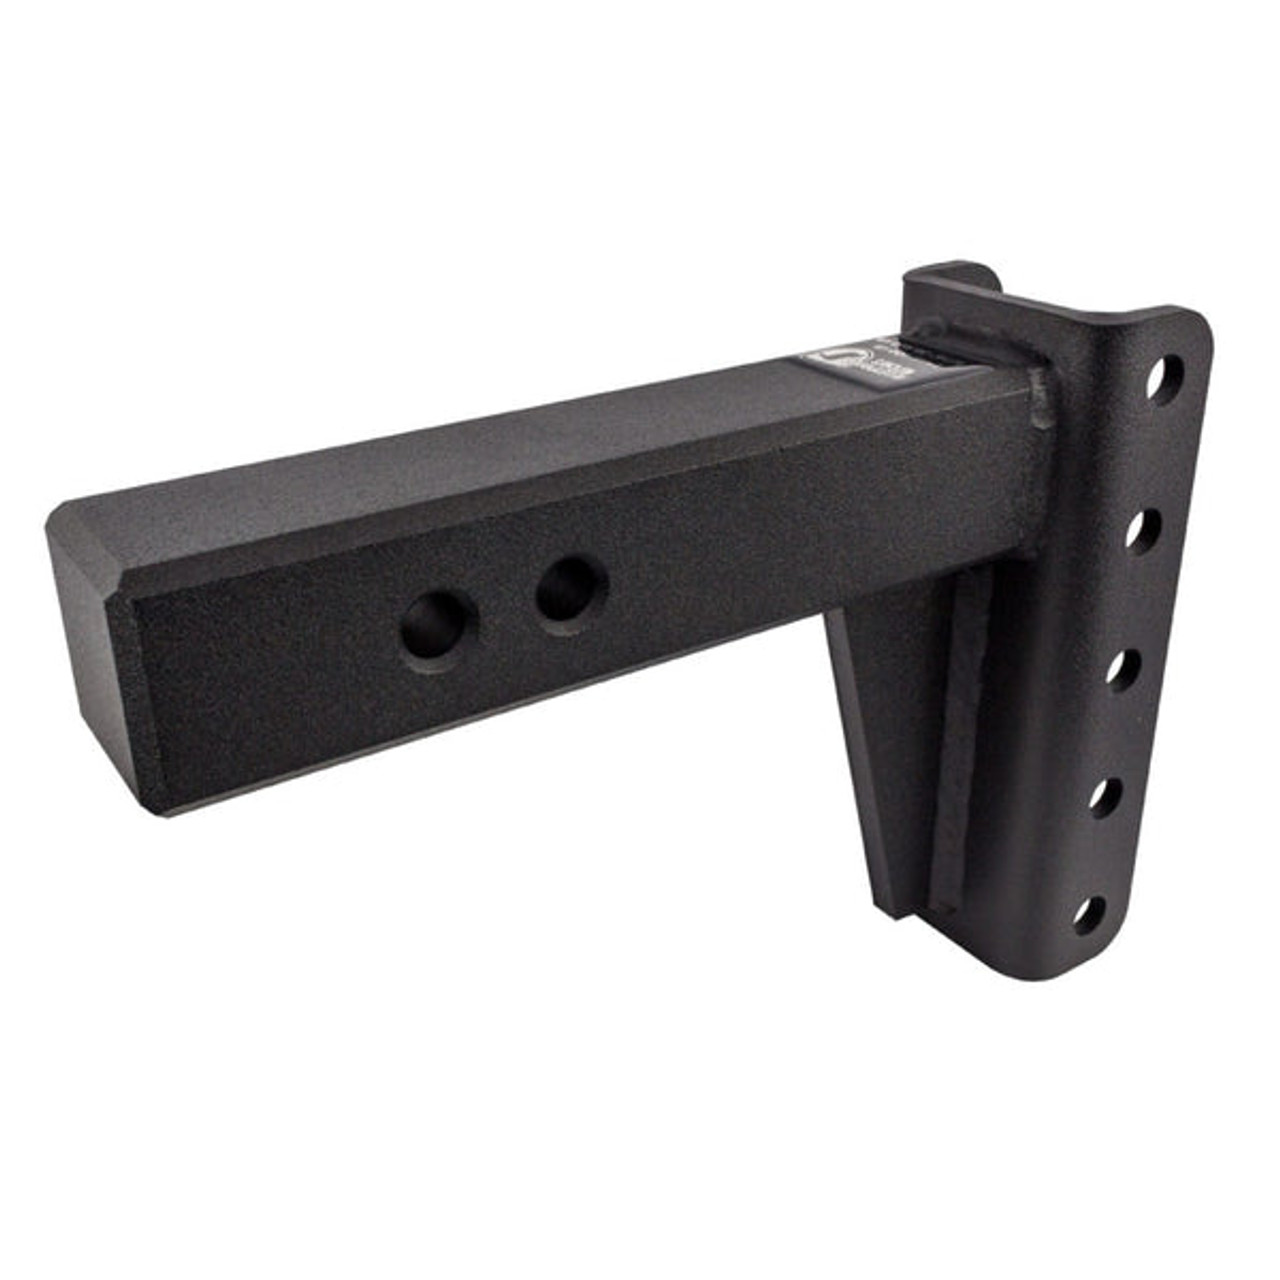 2.5" EXTREME DUTY 4" DROP/RISE HITCH